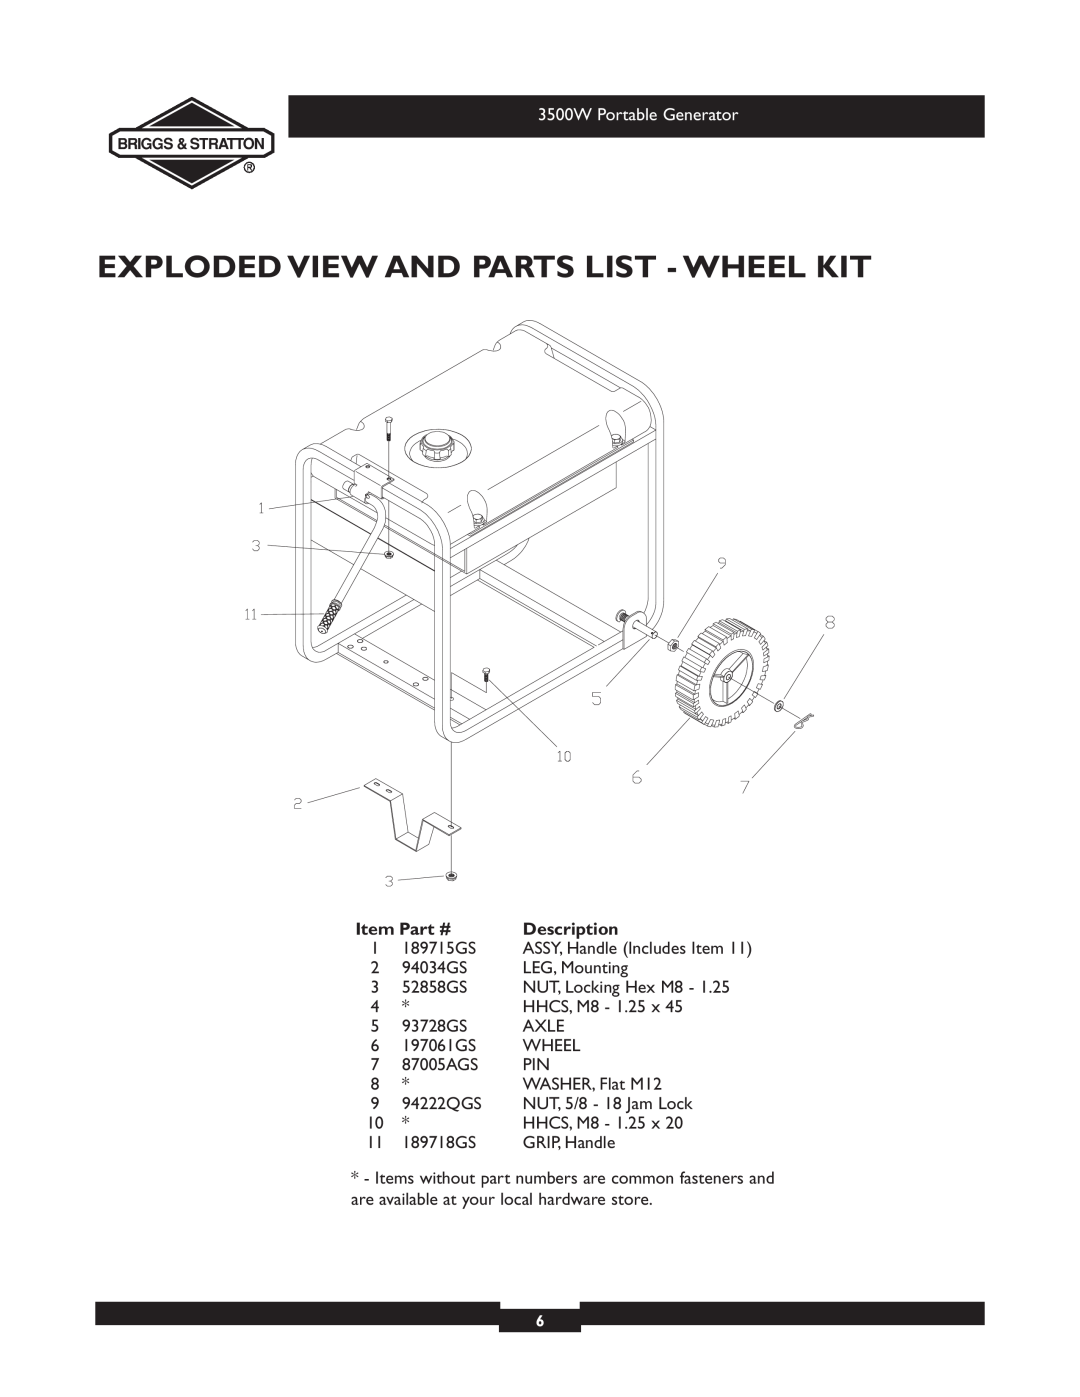 Briggs & Stratton 030208-1 manual Exploded View And Parts List - Wheel Kit, 3500W Portable Generator, Description 